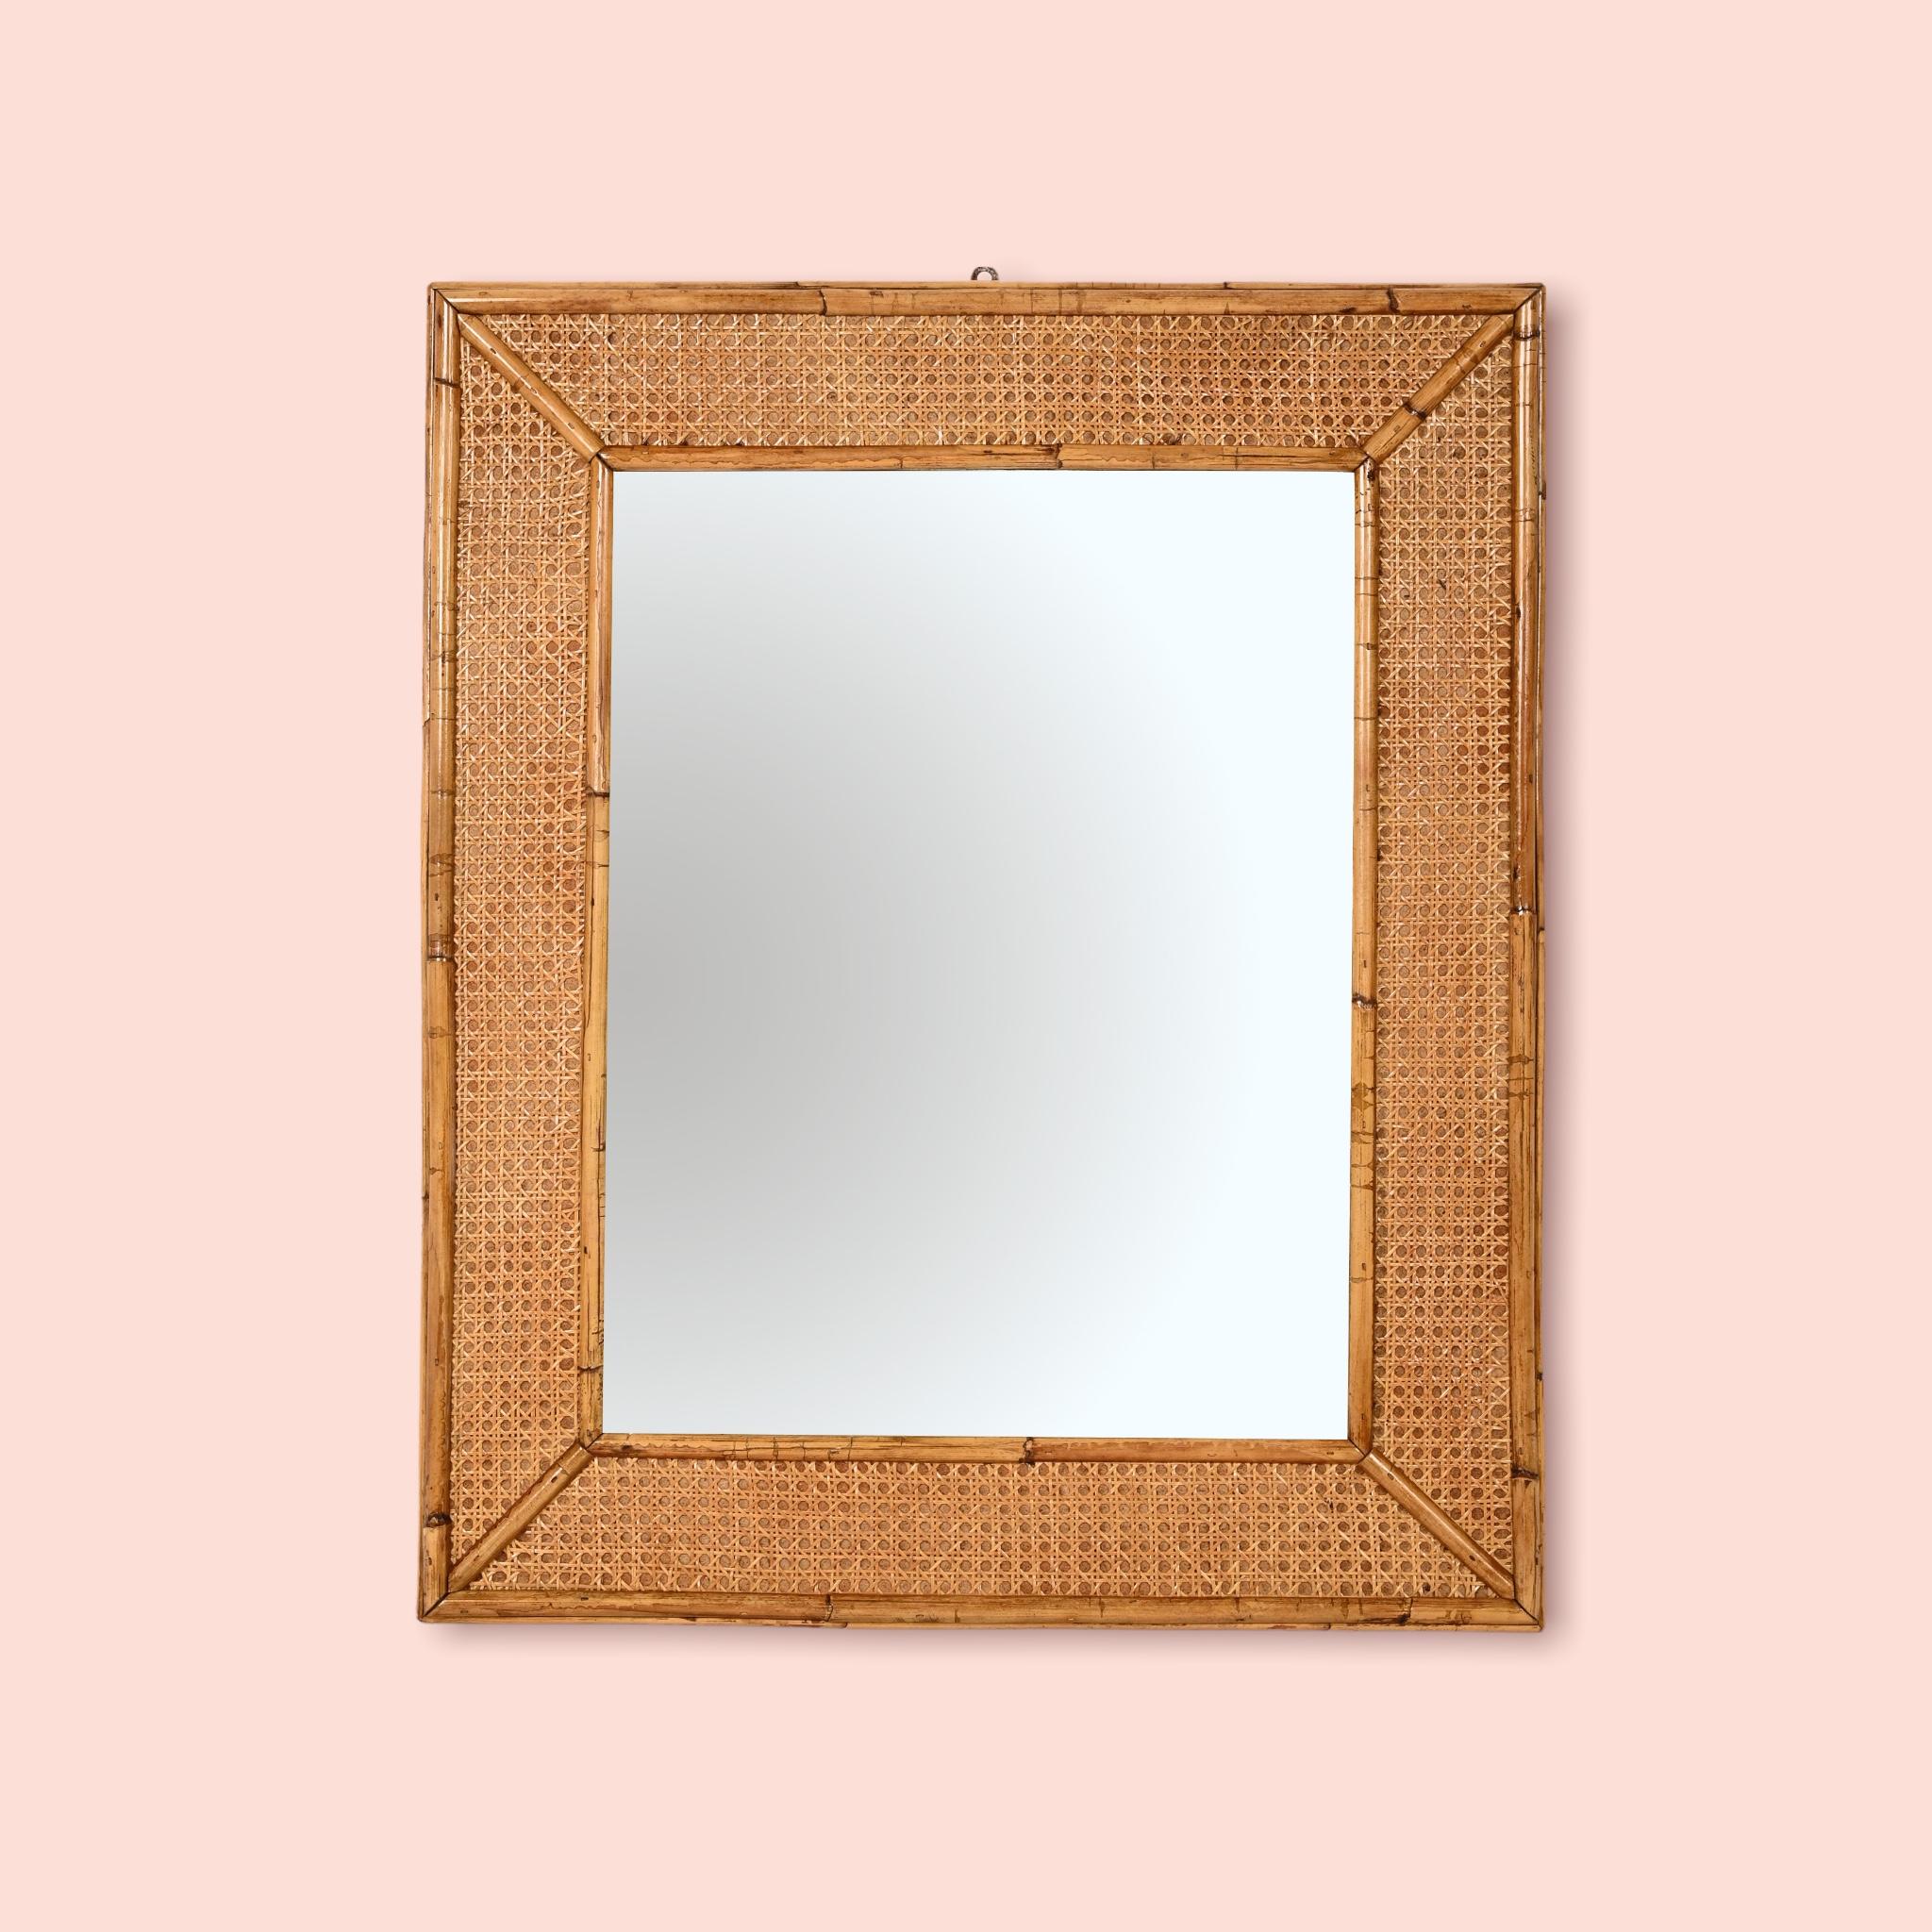 Midcentury Rectangular Italian Mirror with Bamboo and Vienna Straw Frame, 1970s For Sale 2